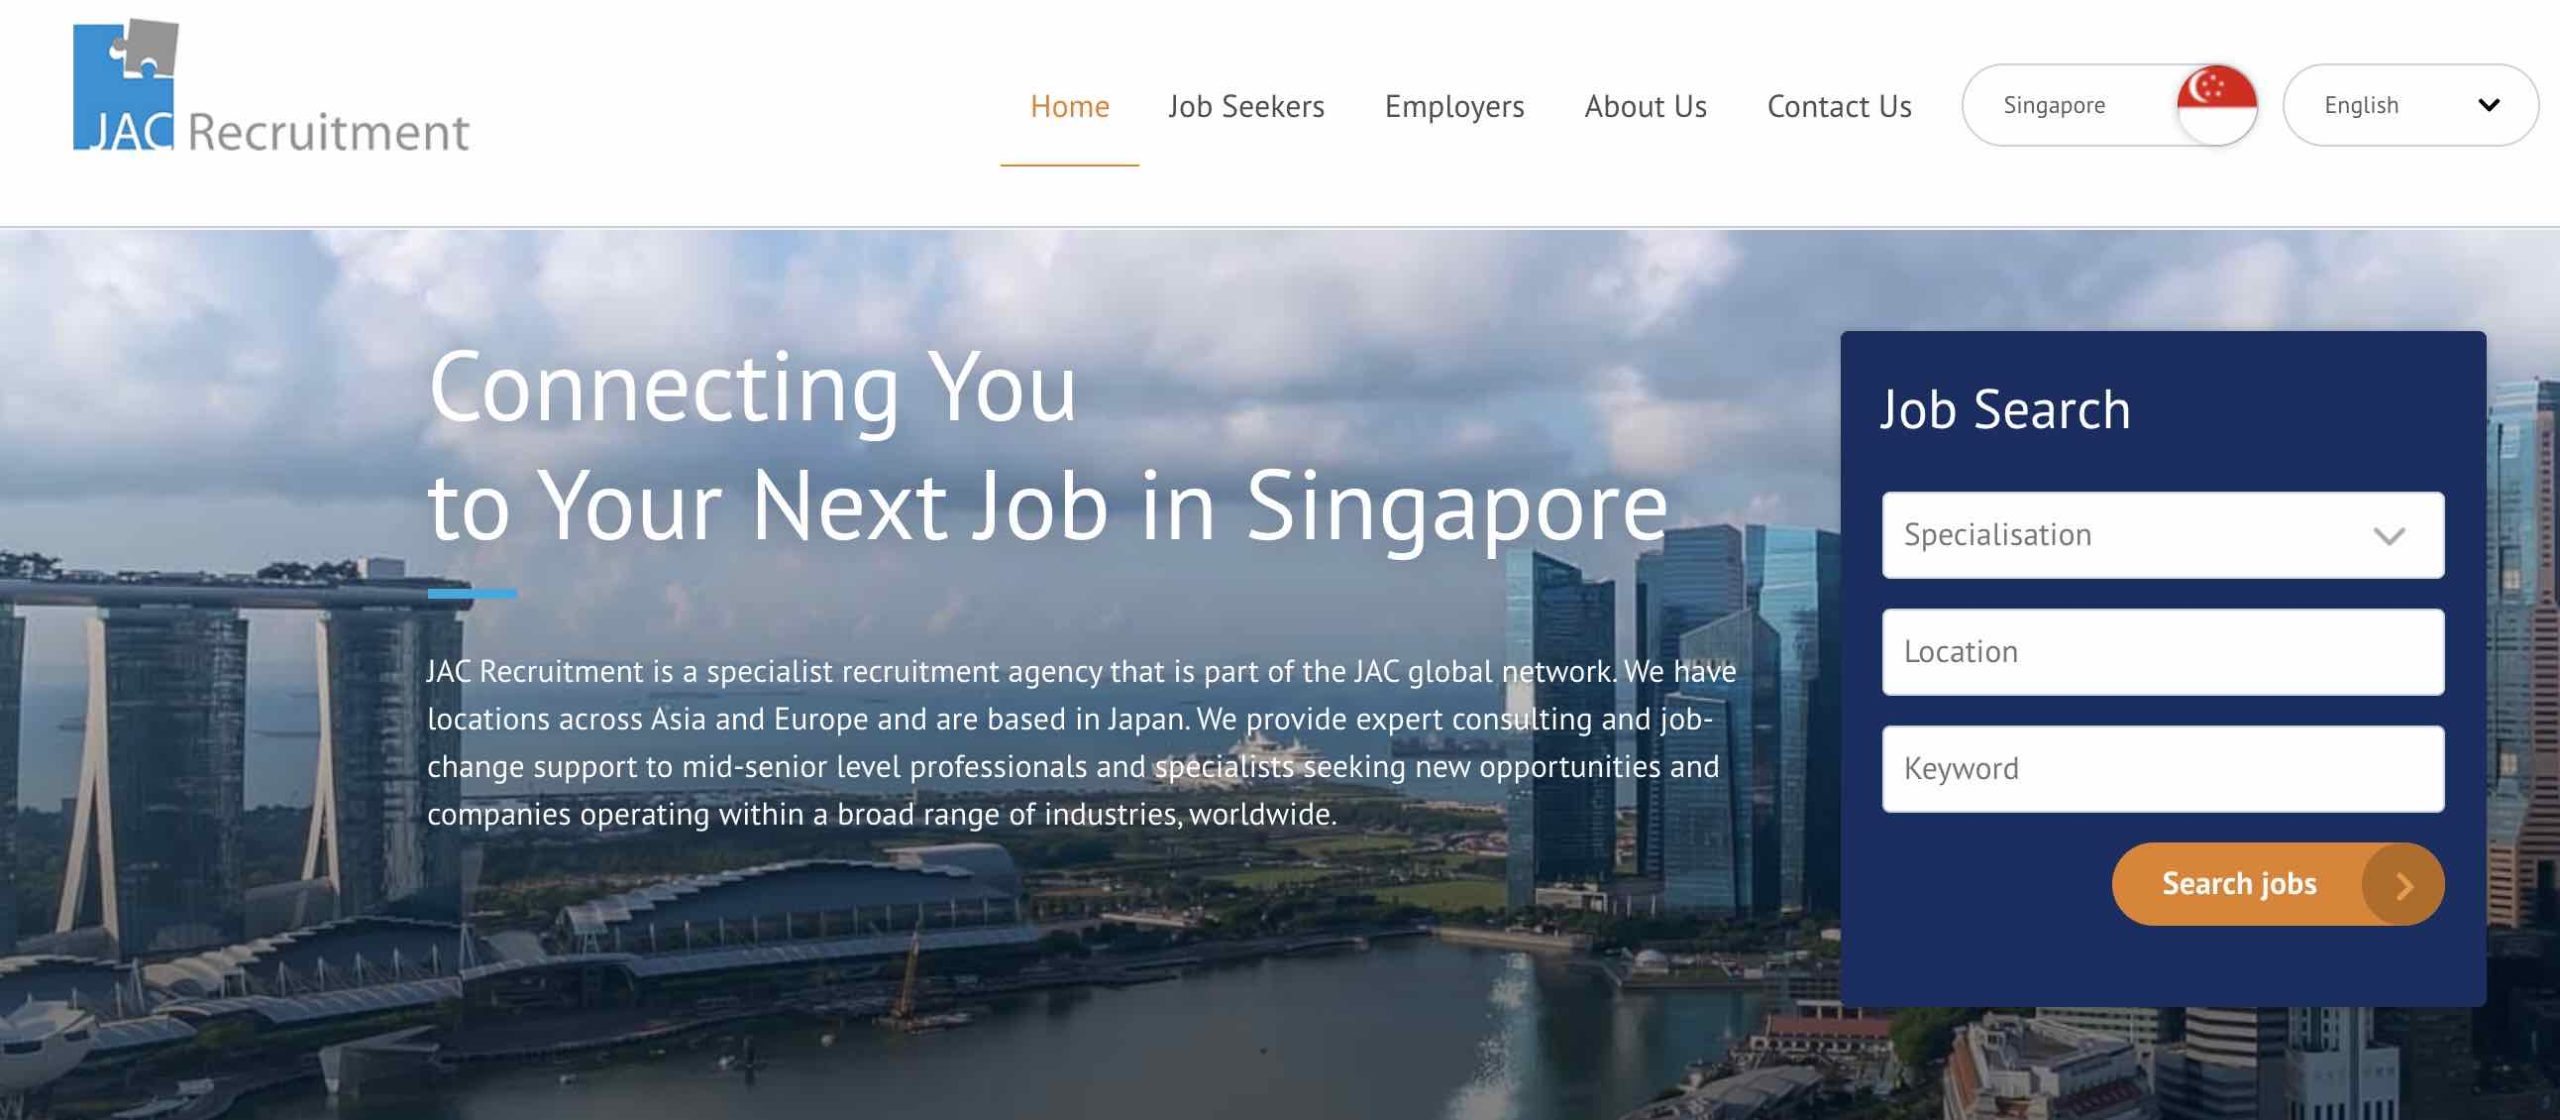 JAC Recruitment Singapore - Recruitment agency and executive search firm